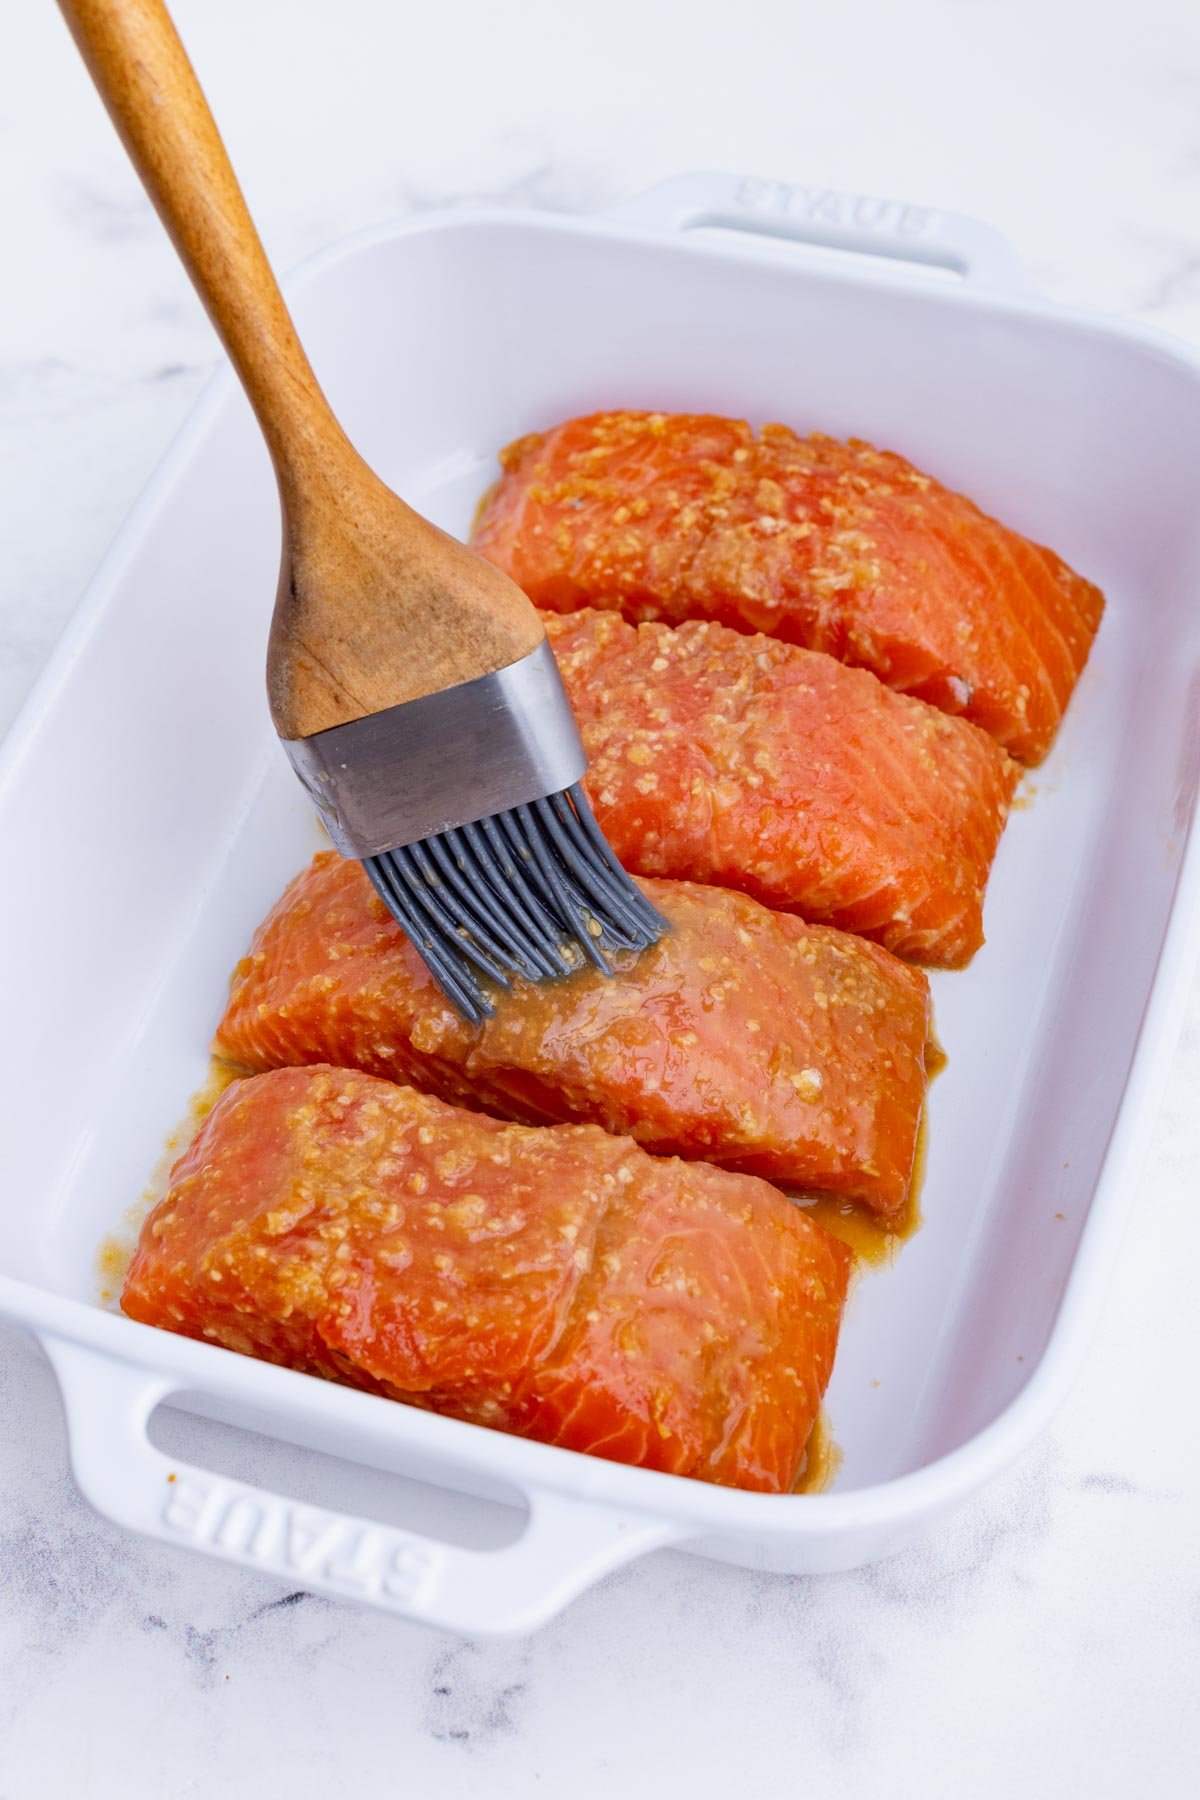 Sauce is brushed on top of salmon in a white baking dish.